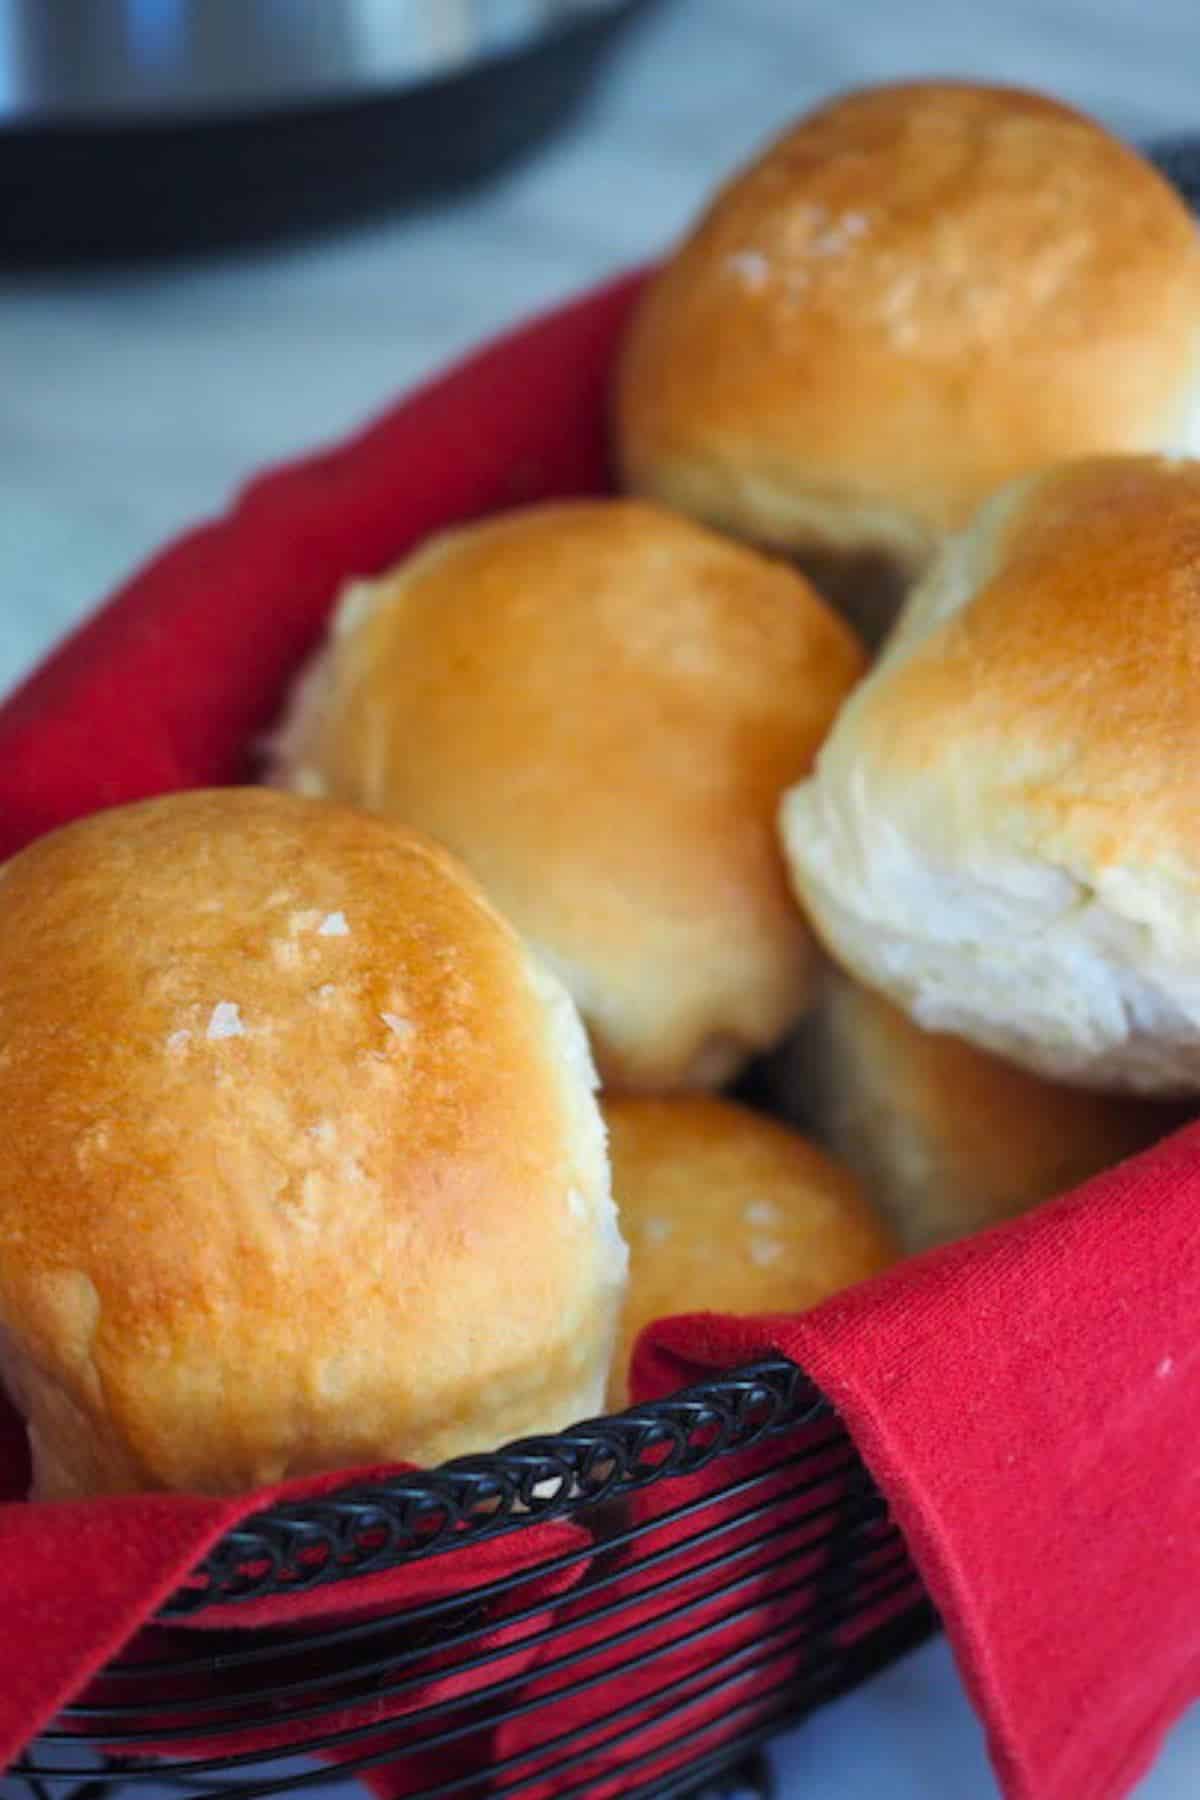 Yeast rolls in a basket with a red napkin.